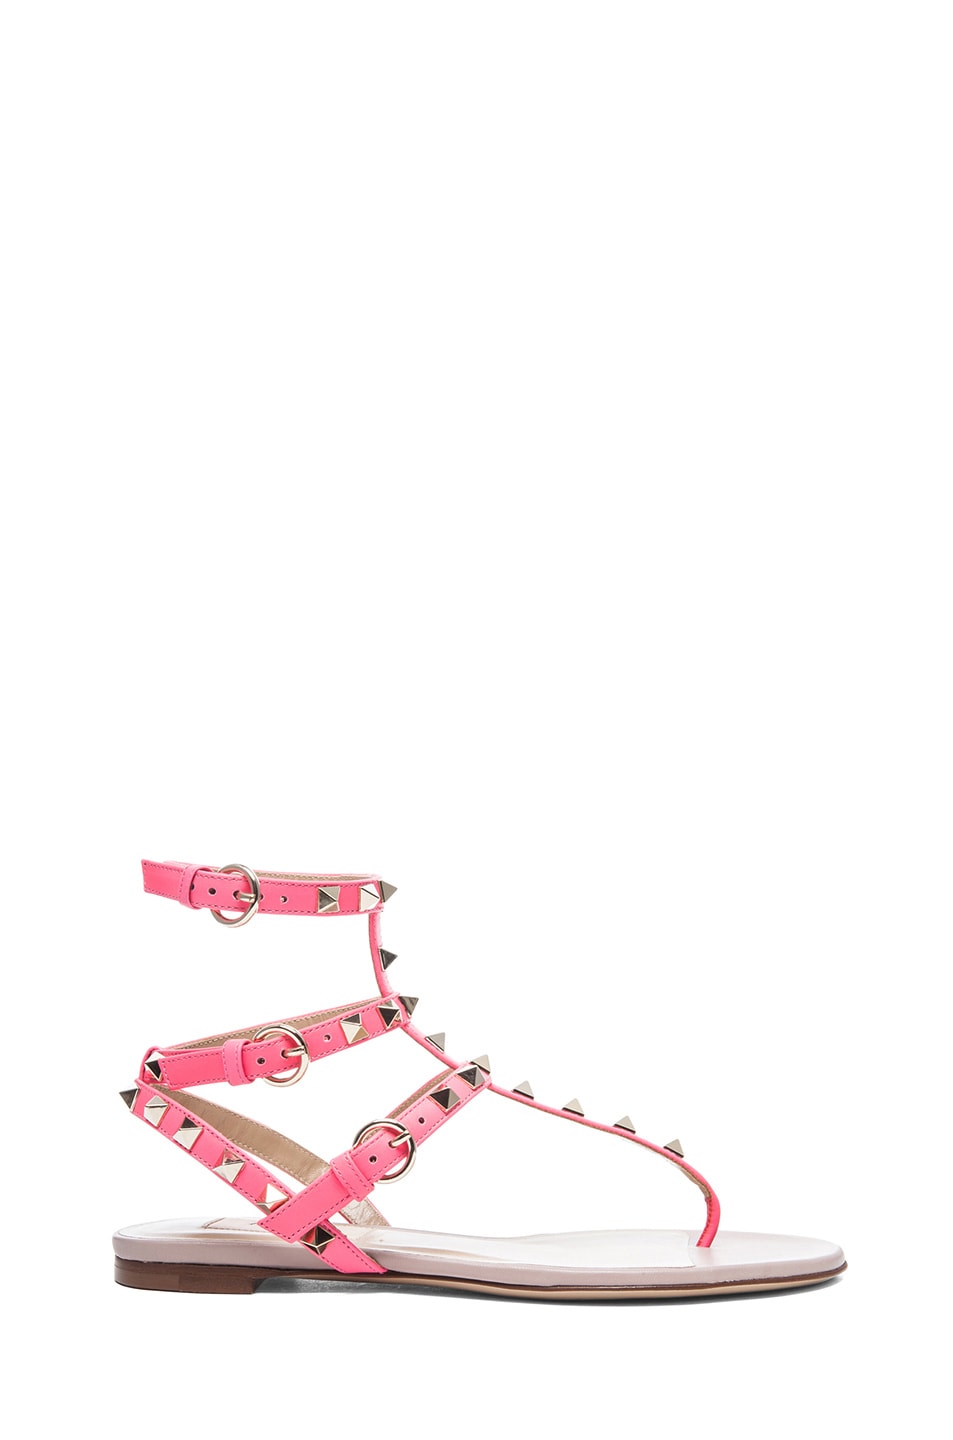 Valentino Rockstud Leather Sandals T.05 in Fluo Pink | FWRD